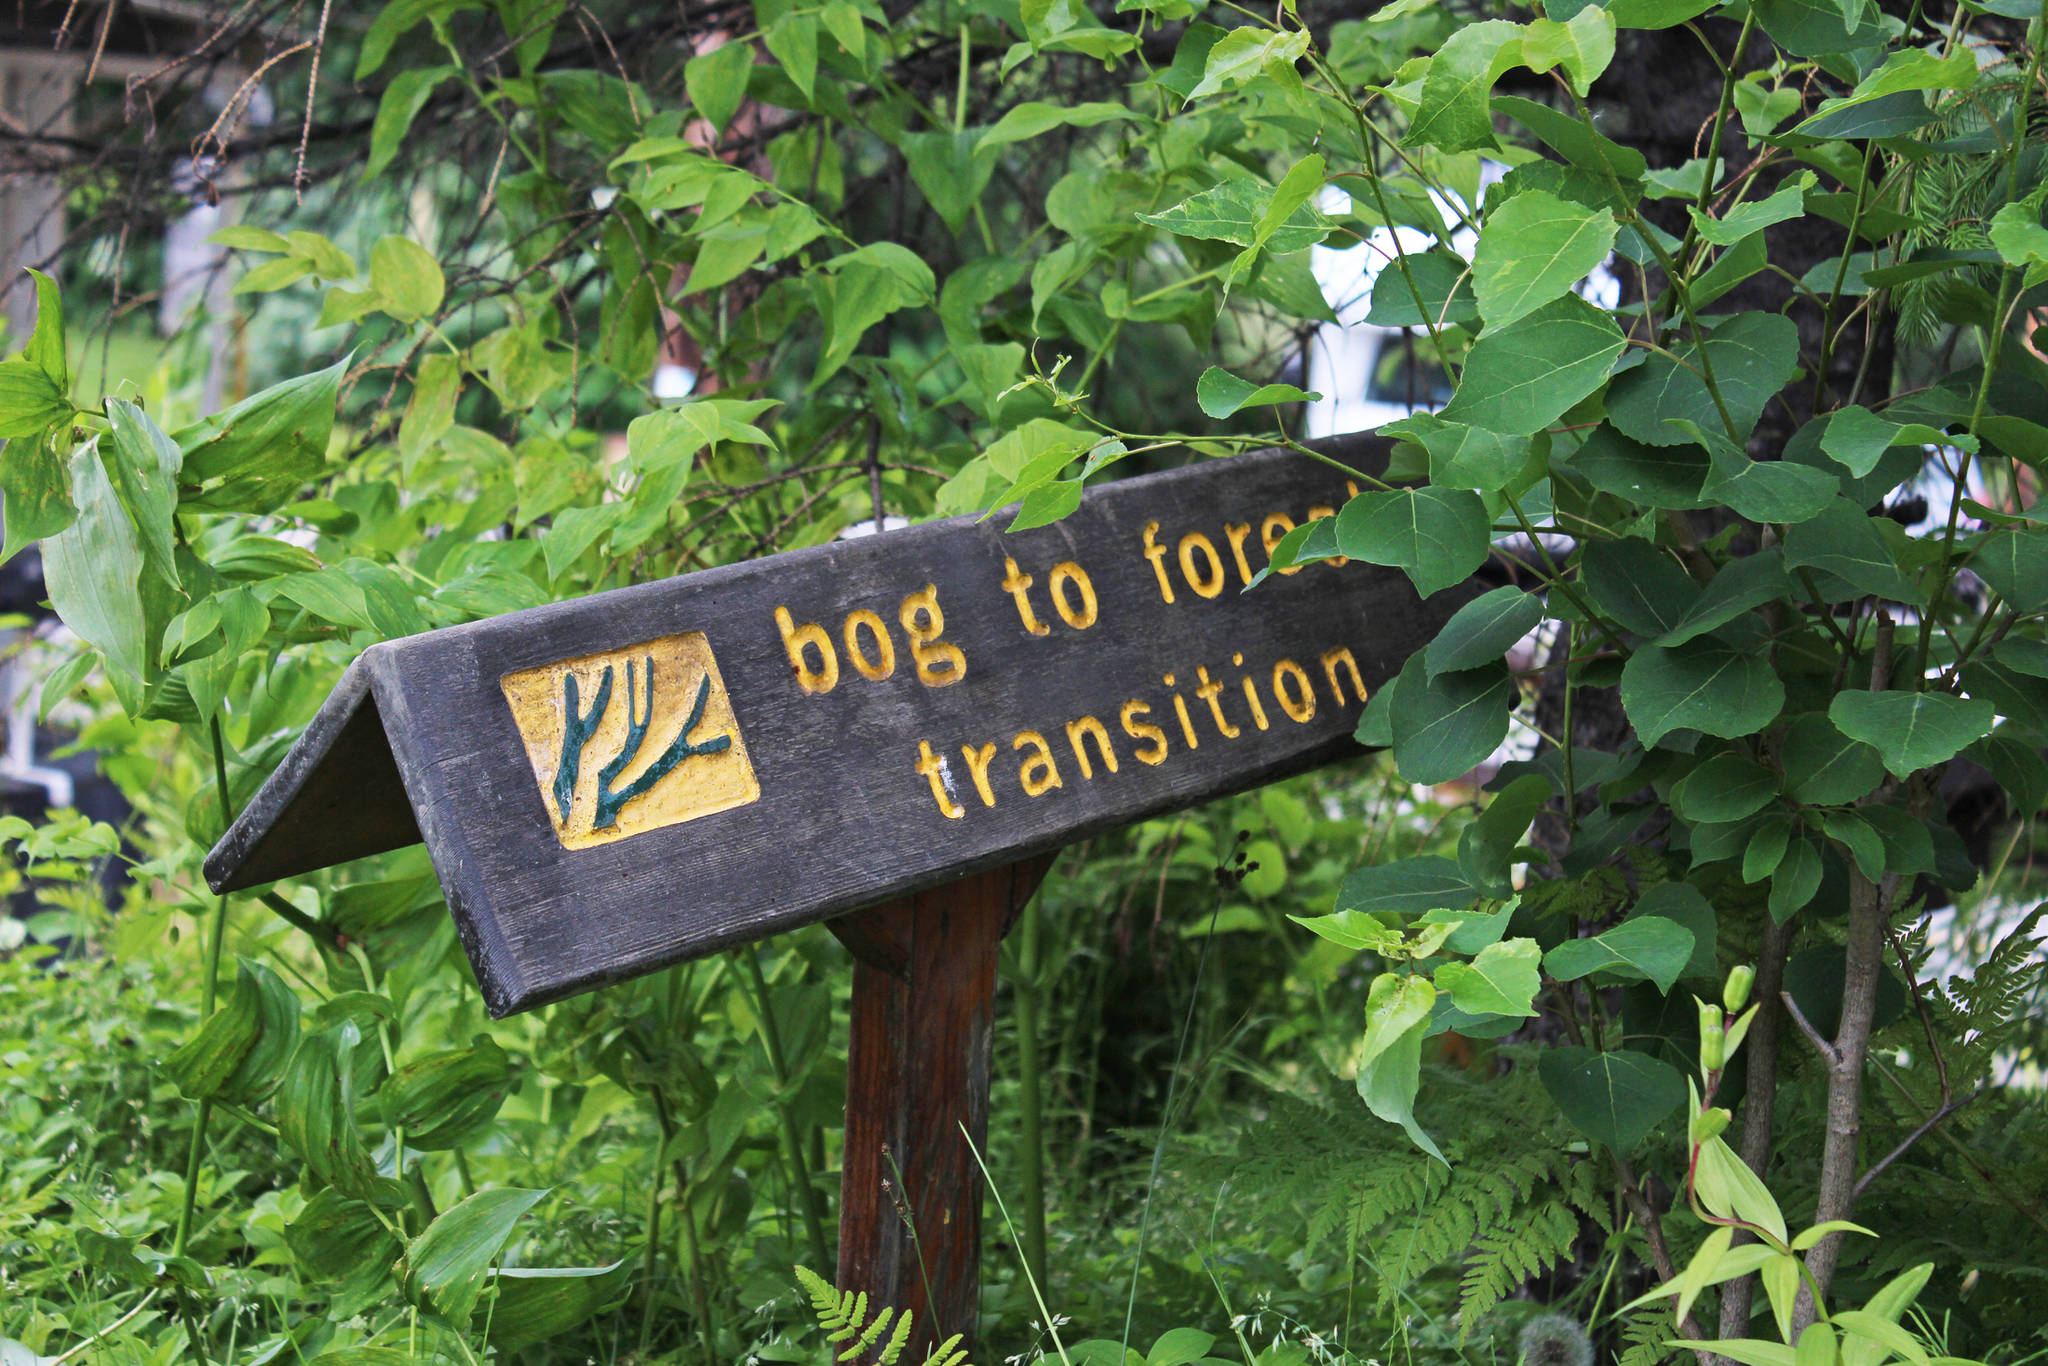 A sign points out to visitors a transition in the climate and makeup of the Pratt Museum’s botanical garden, pictured here Thursday, July 12, 2018 in Homer, Alaska. One of the projects for Yarrow Hinnant, the museum’s new gardener, is revamping some of the signage for the garden. (Photo by Megan Pacer/Homer News)